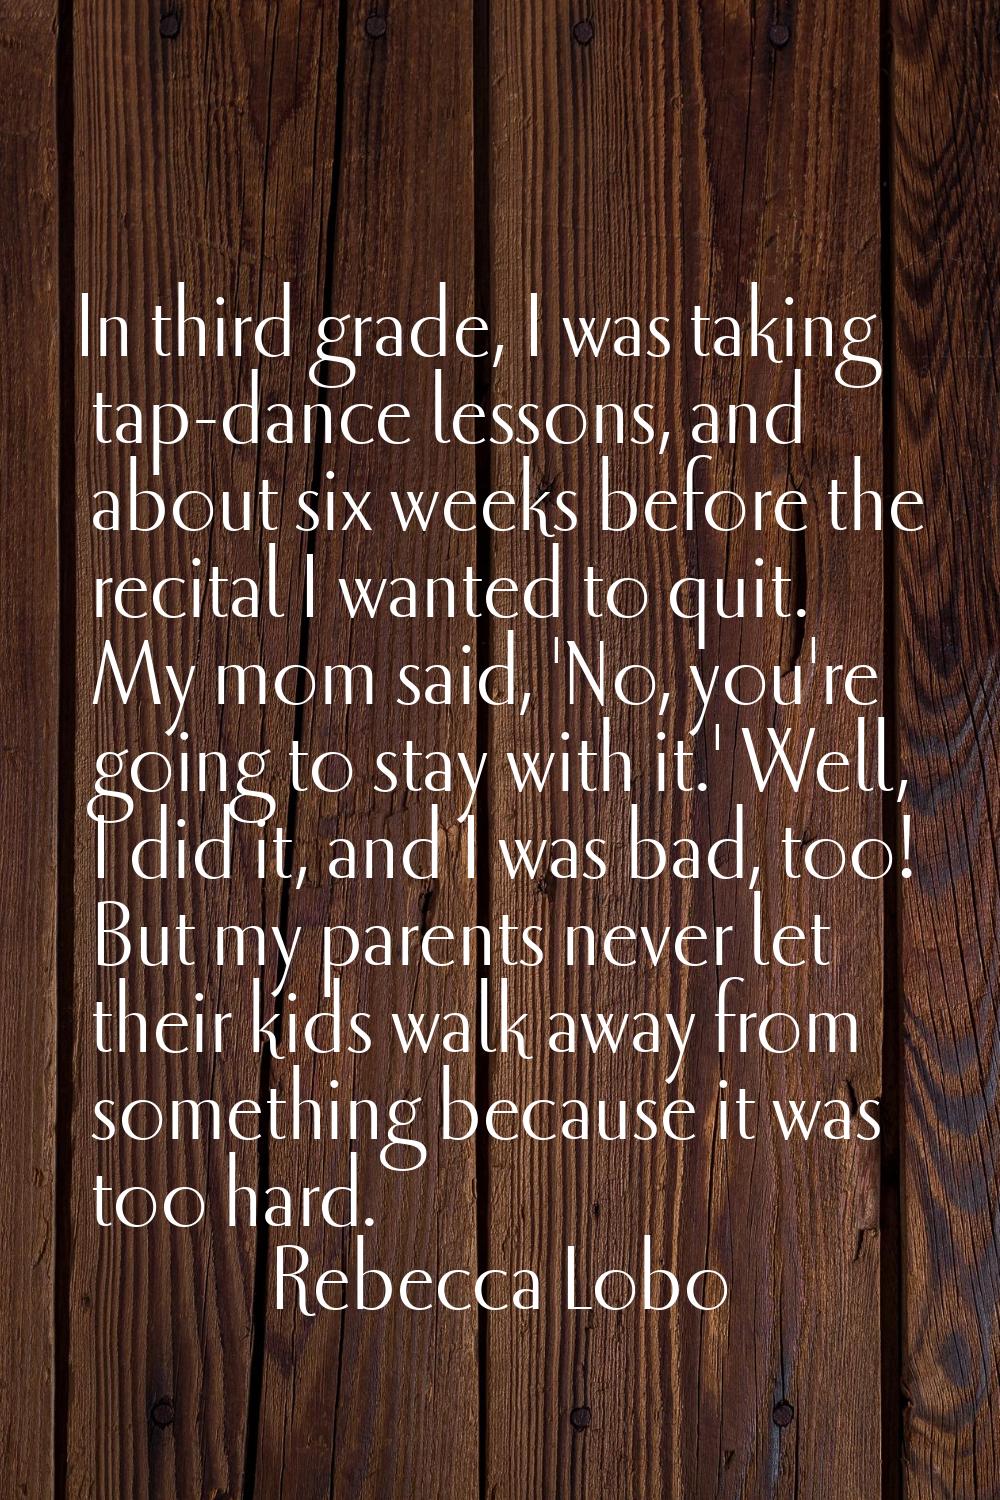 In third grade, I was taking tap-dance lessons, and about six weeks before the recital I wanted to 